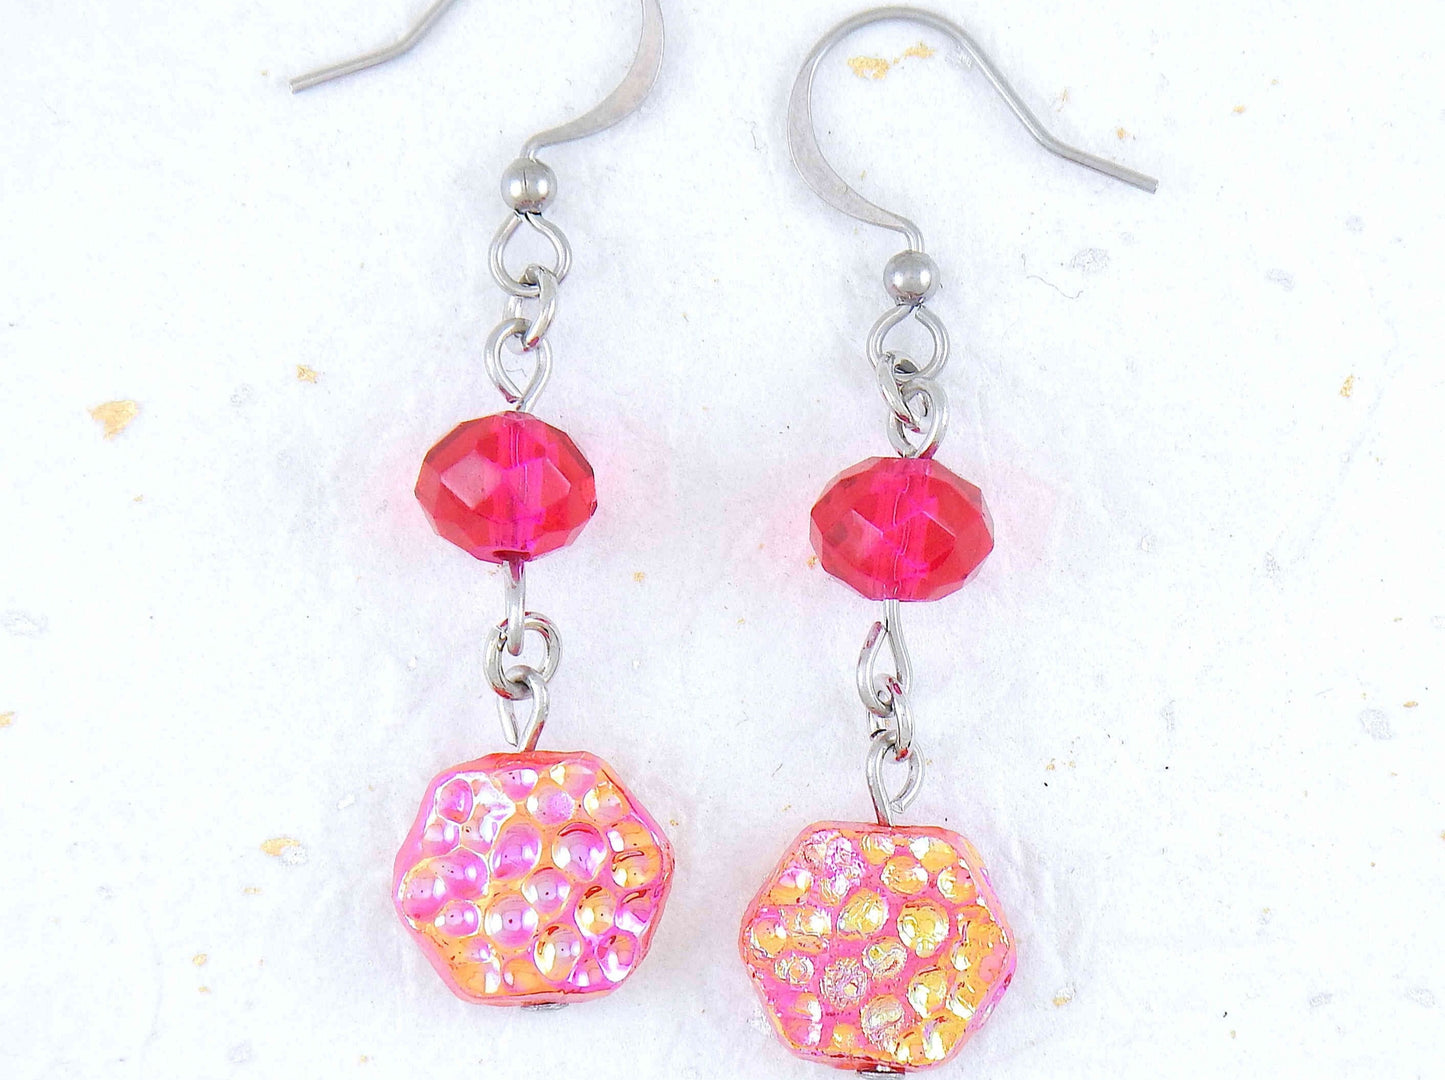 Long earrings with vintage iridescent textured glass hexagons, assorted crystals, available in 3 bright colours (orange, turquoise, fuchsia), stainless steel hooks